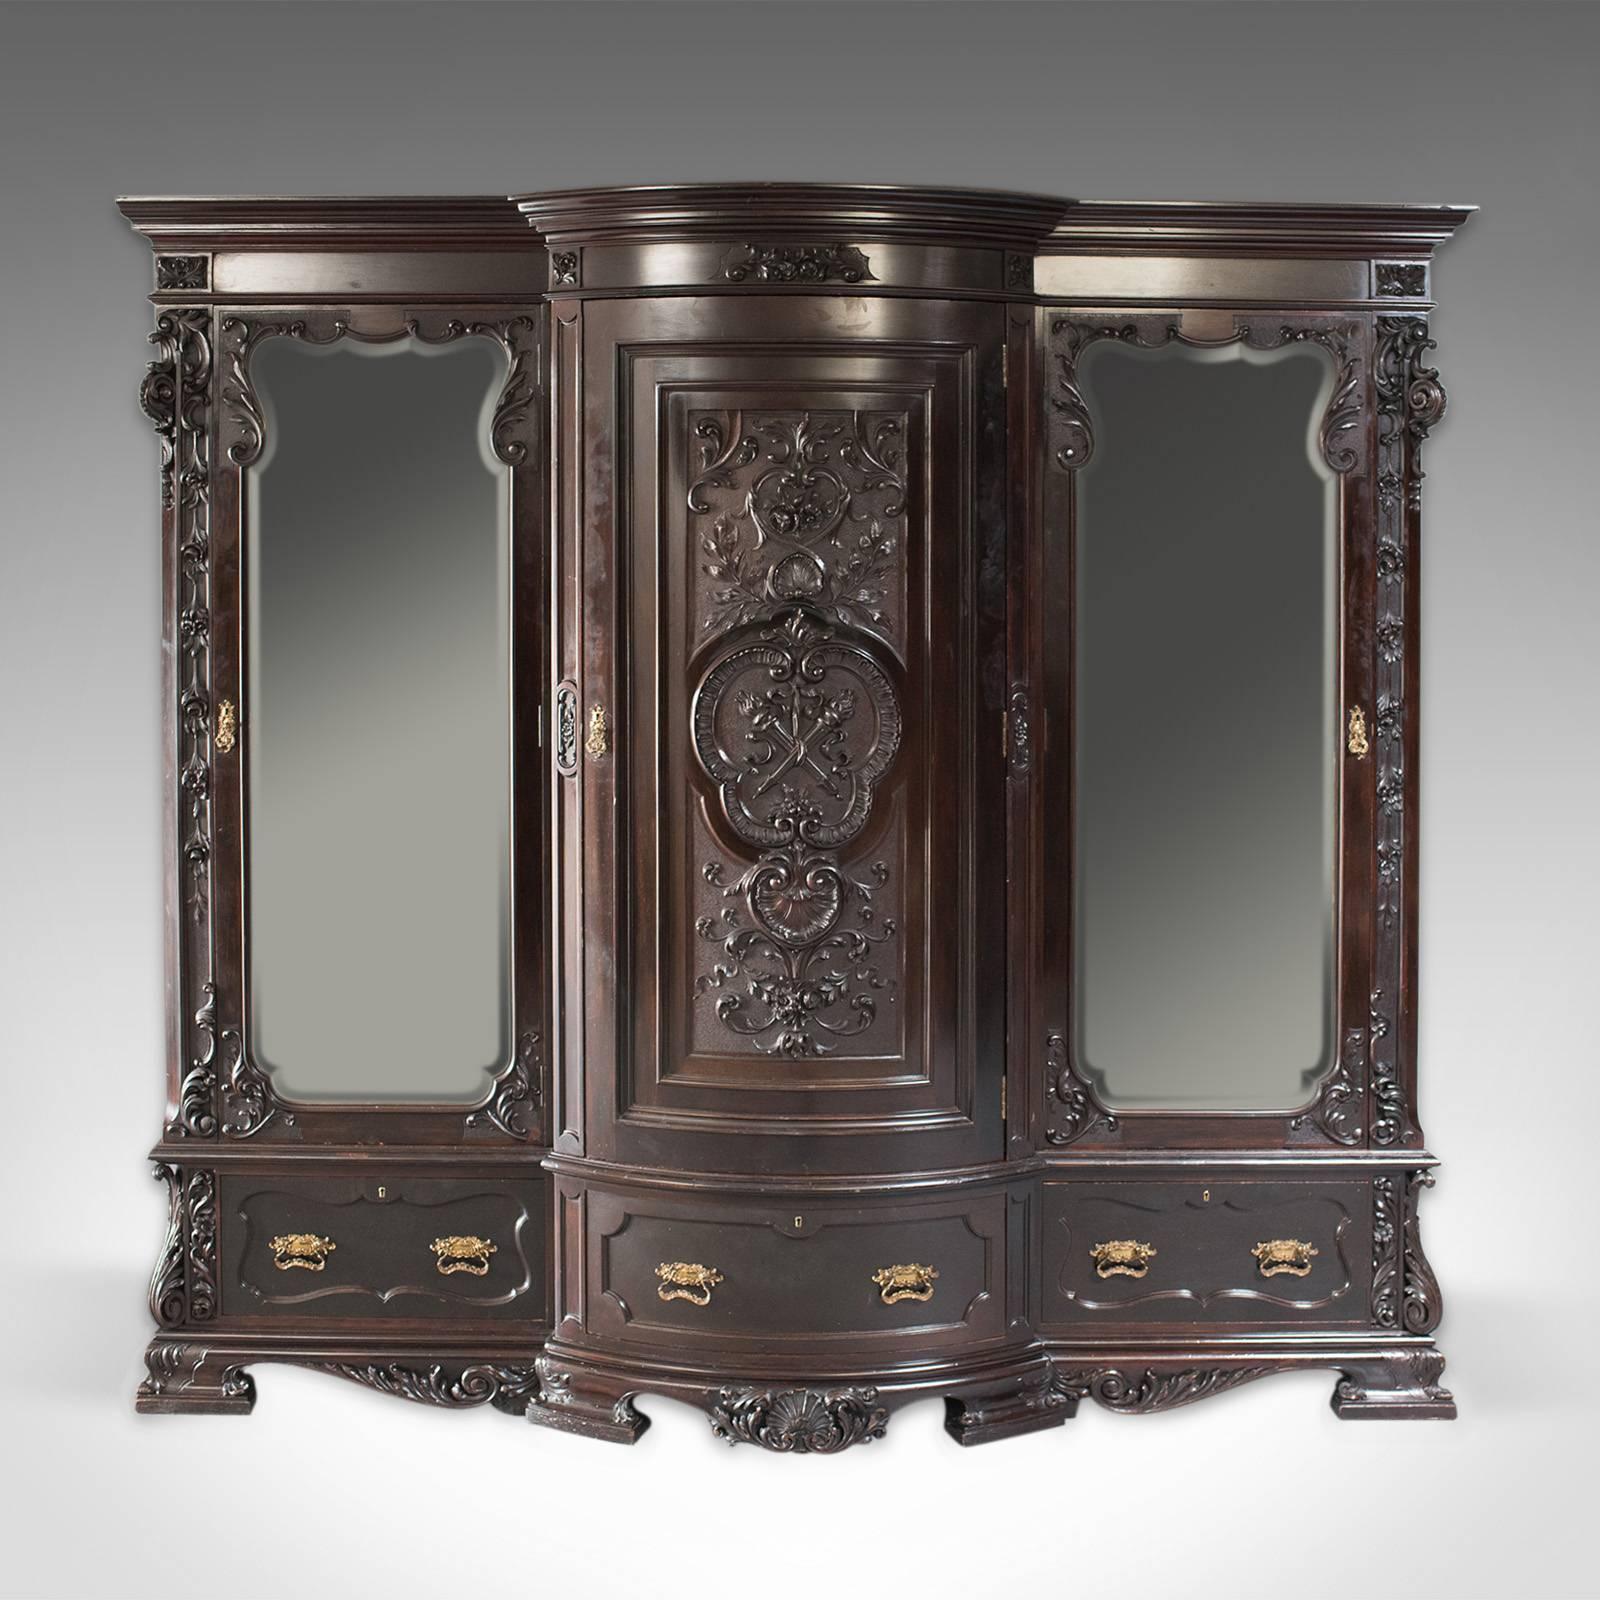 This is a very large Victorian, English, antique wardrobe. A compactum in mahogany dating to the mid-19th century, circa 1870.

A commanding statement piece of country house proportion
Superior quality craftsmanship with finely executed